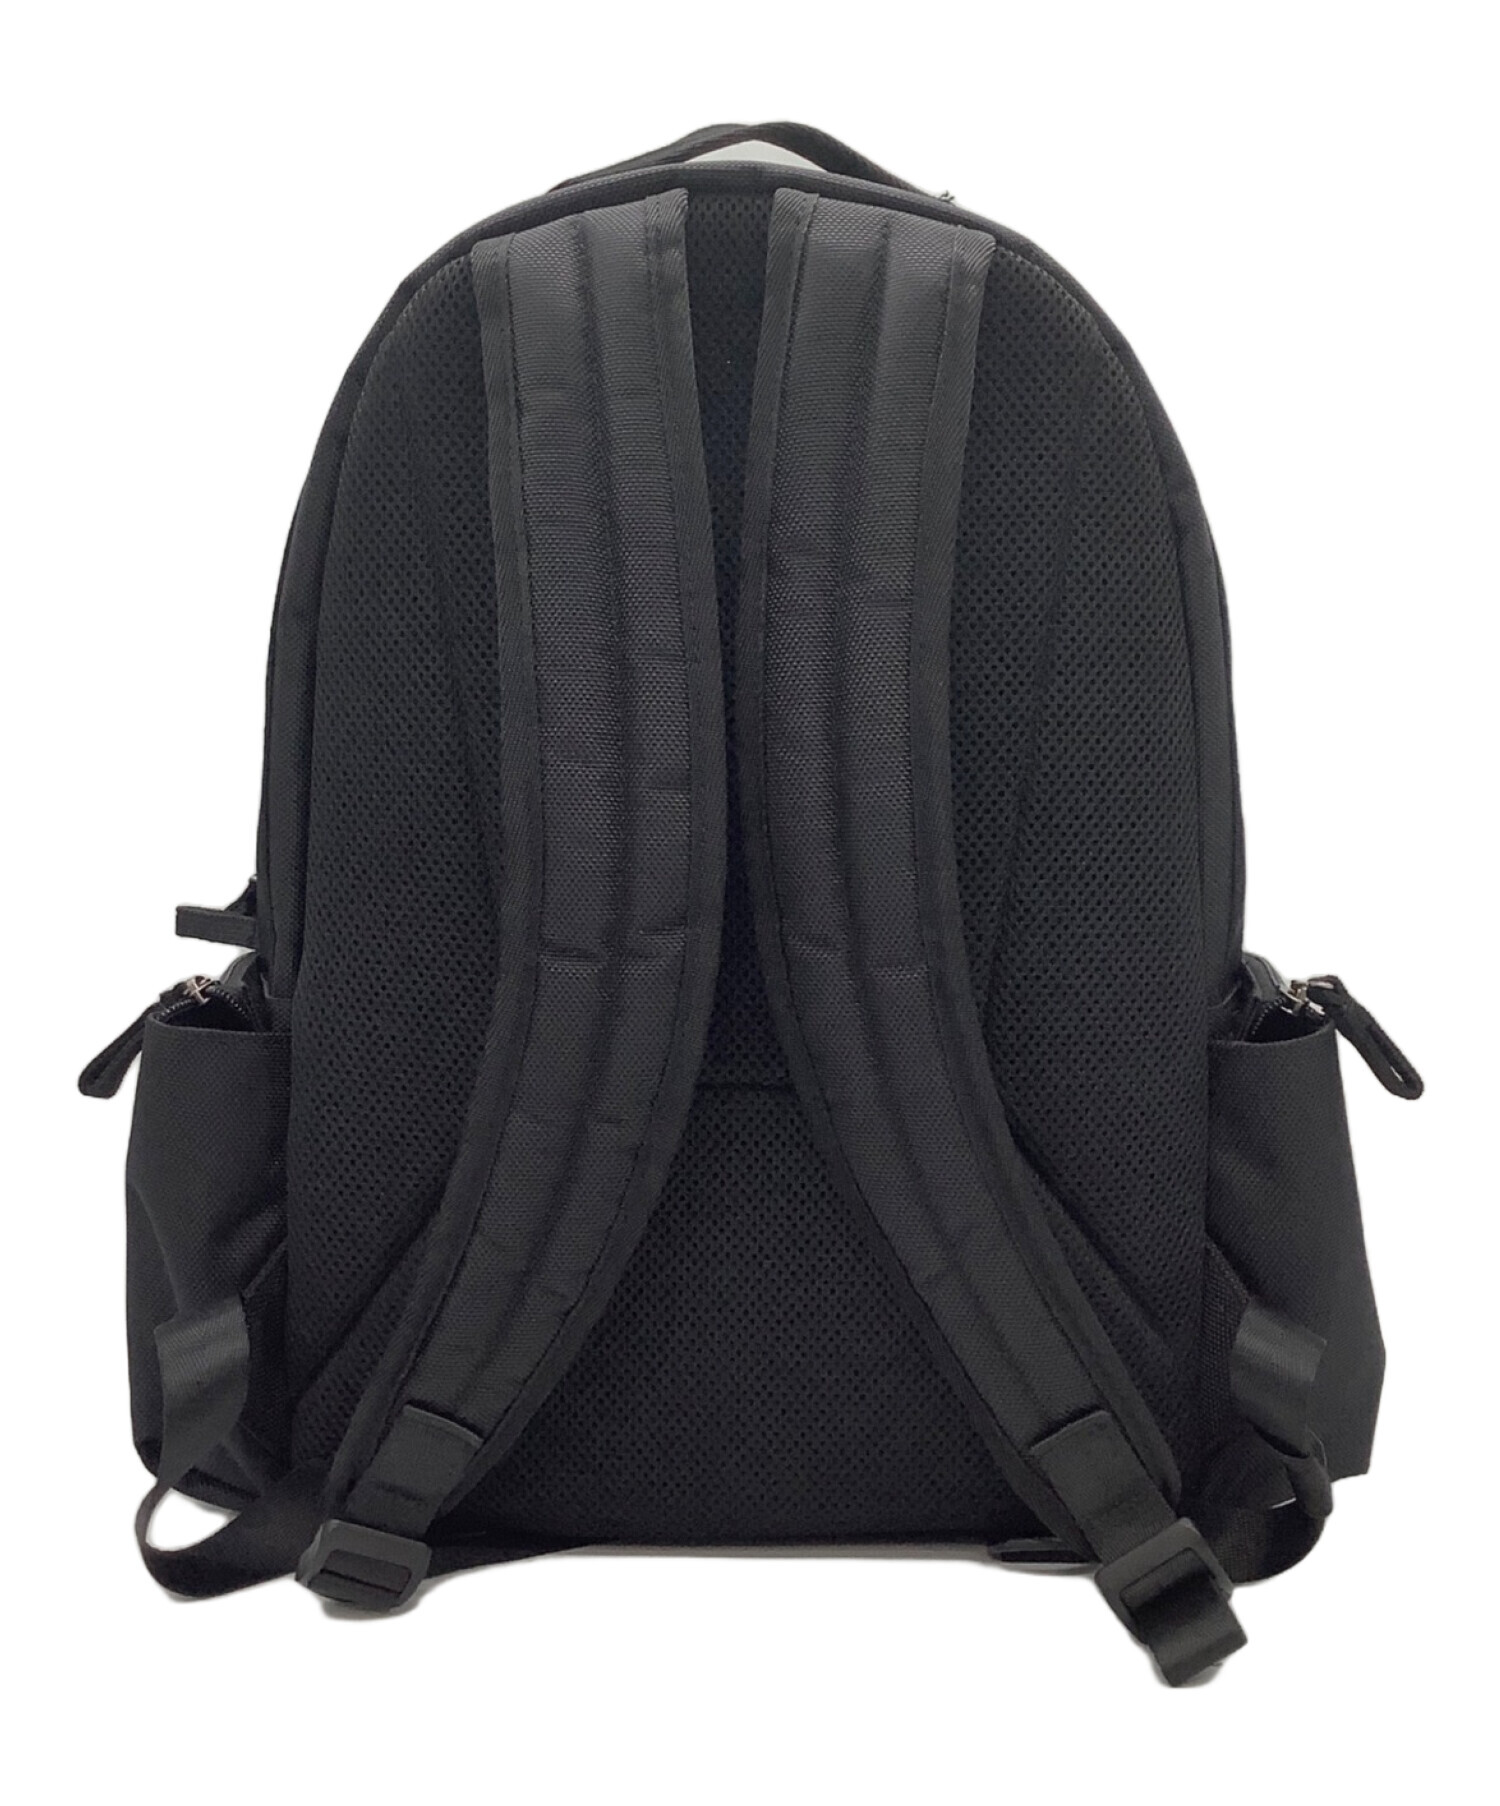 NEW新品tokui video / awesome backpack 大 / 徳井ビデオ バッグ